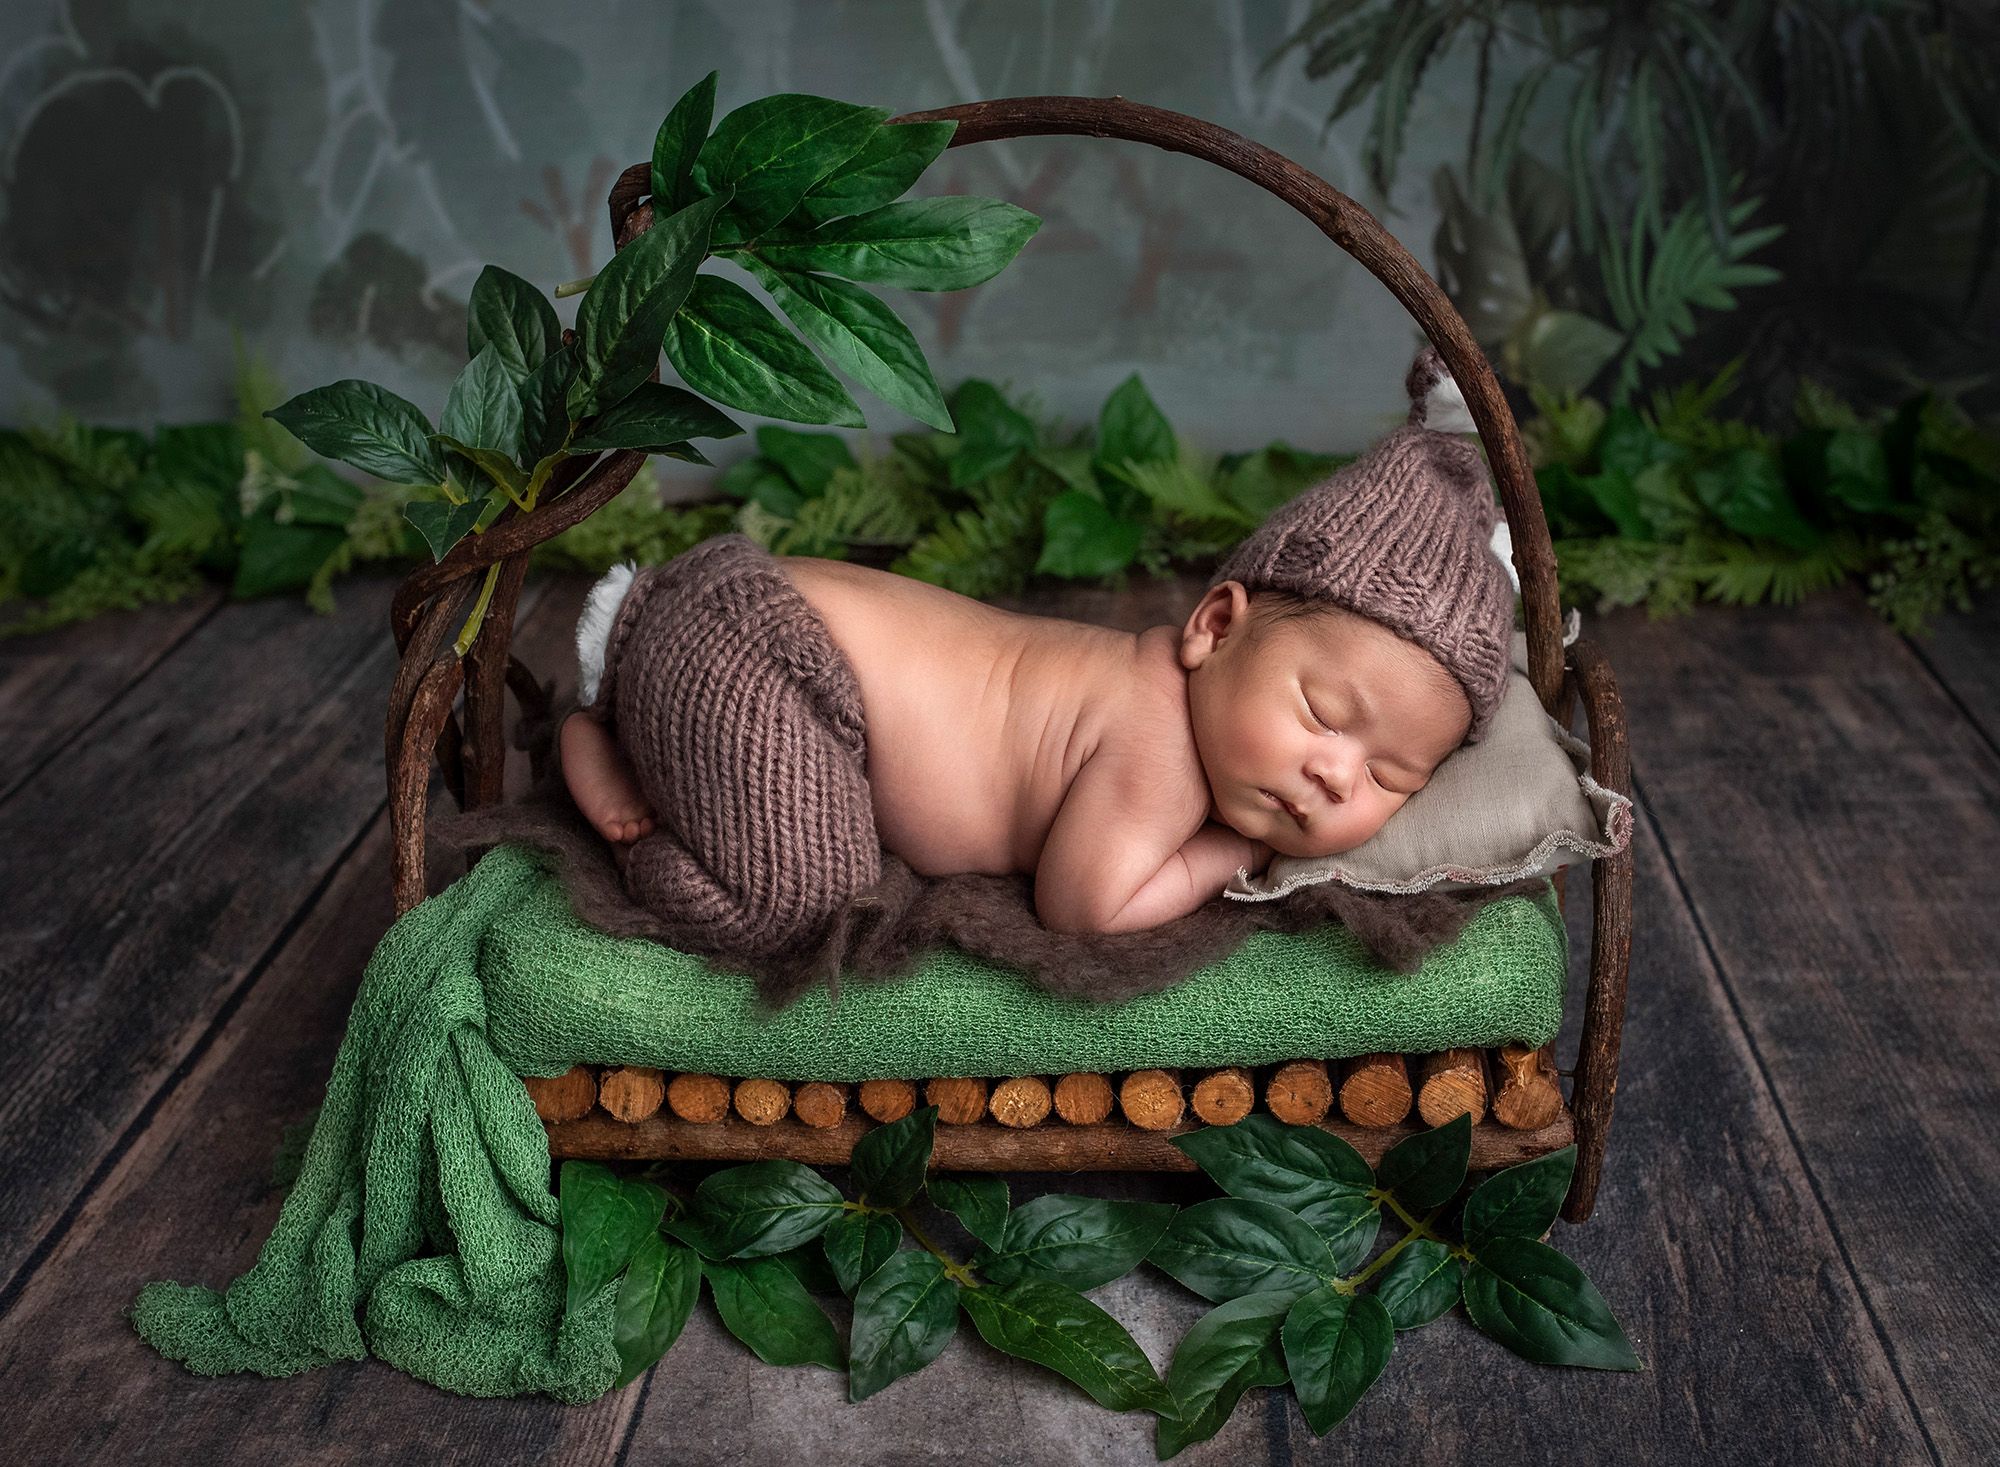 Newborn photos with Thai culture newborn baby boy asleep on wooden bed in the forest